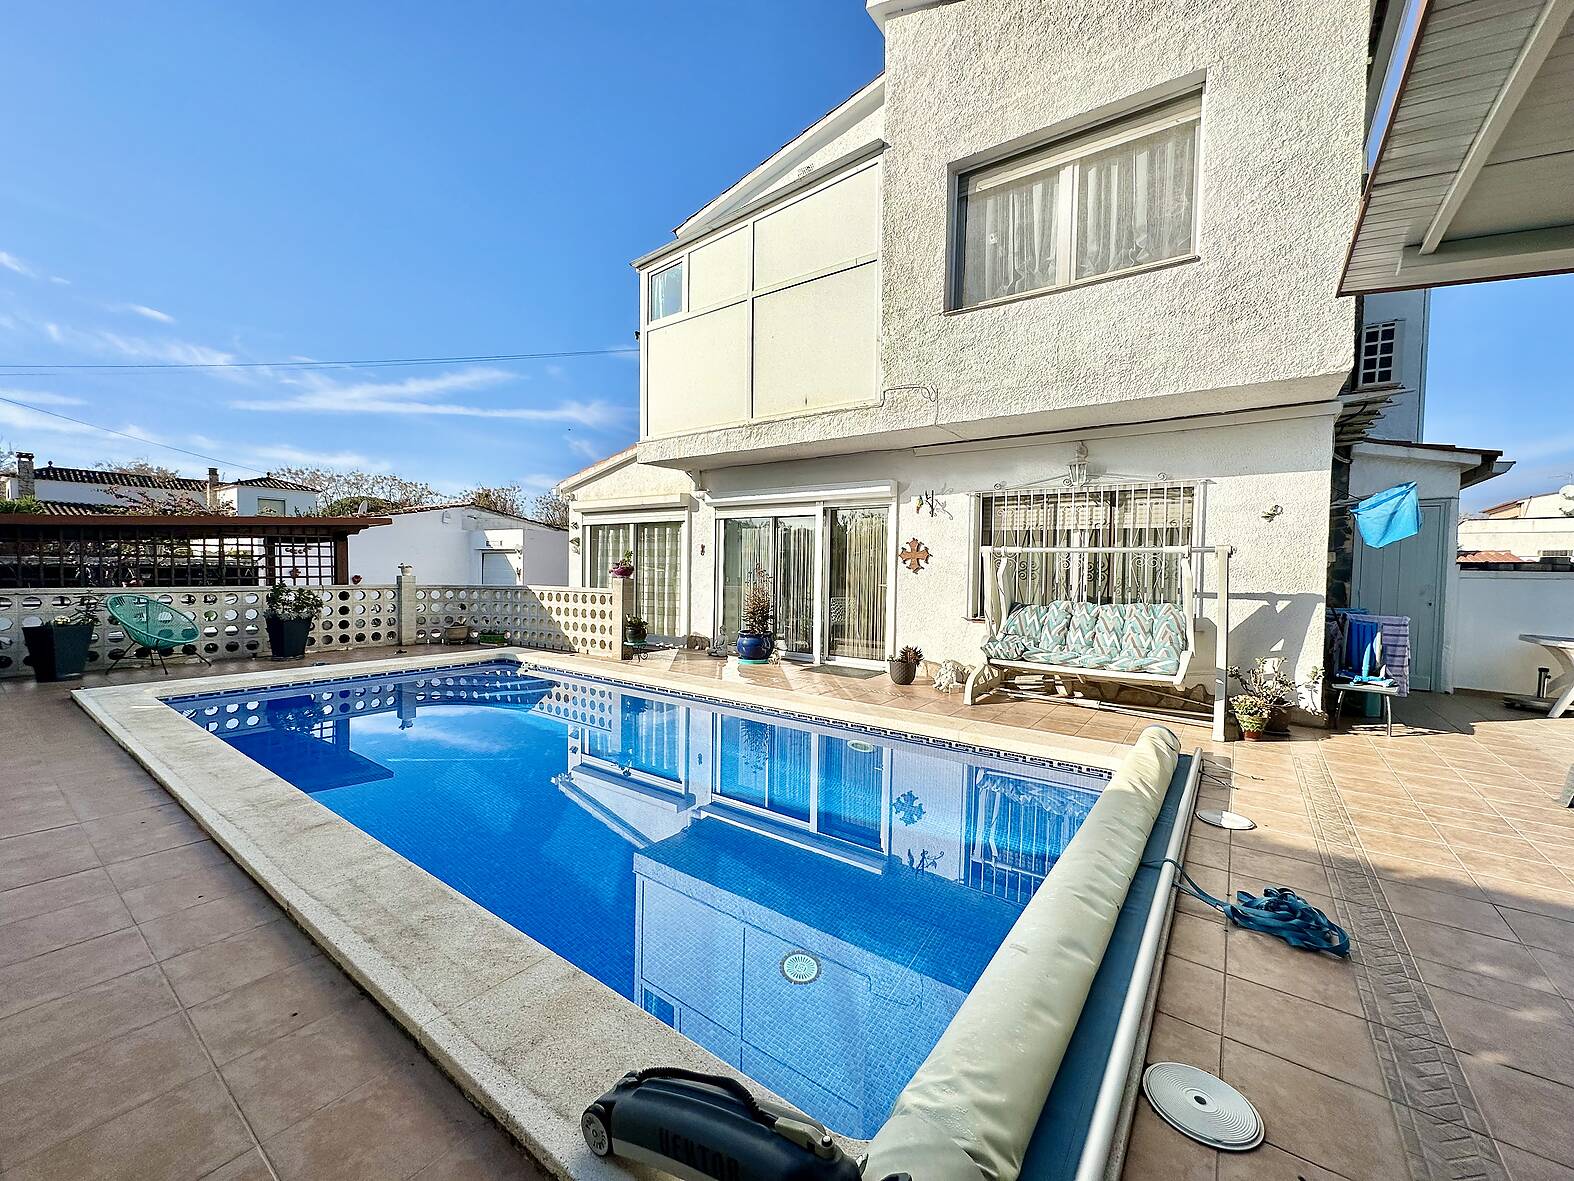 Beautiful house with swimming pool and independent studio for sale in Empuriabrava